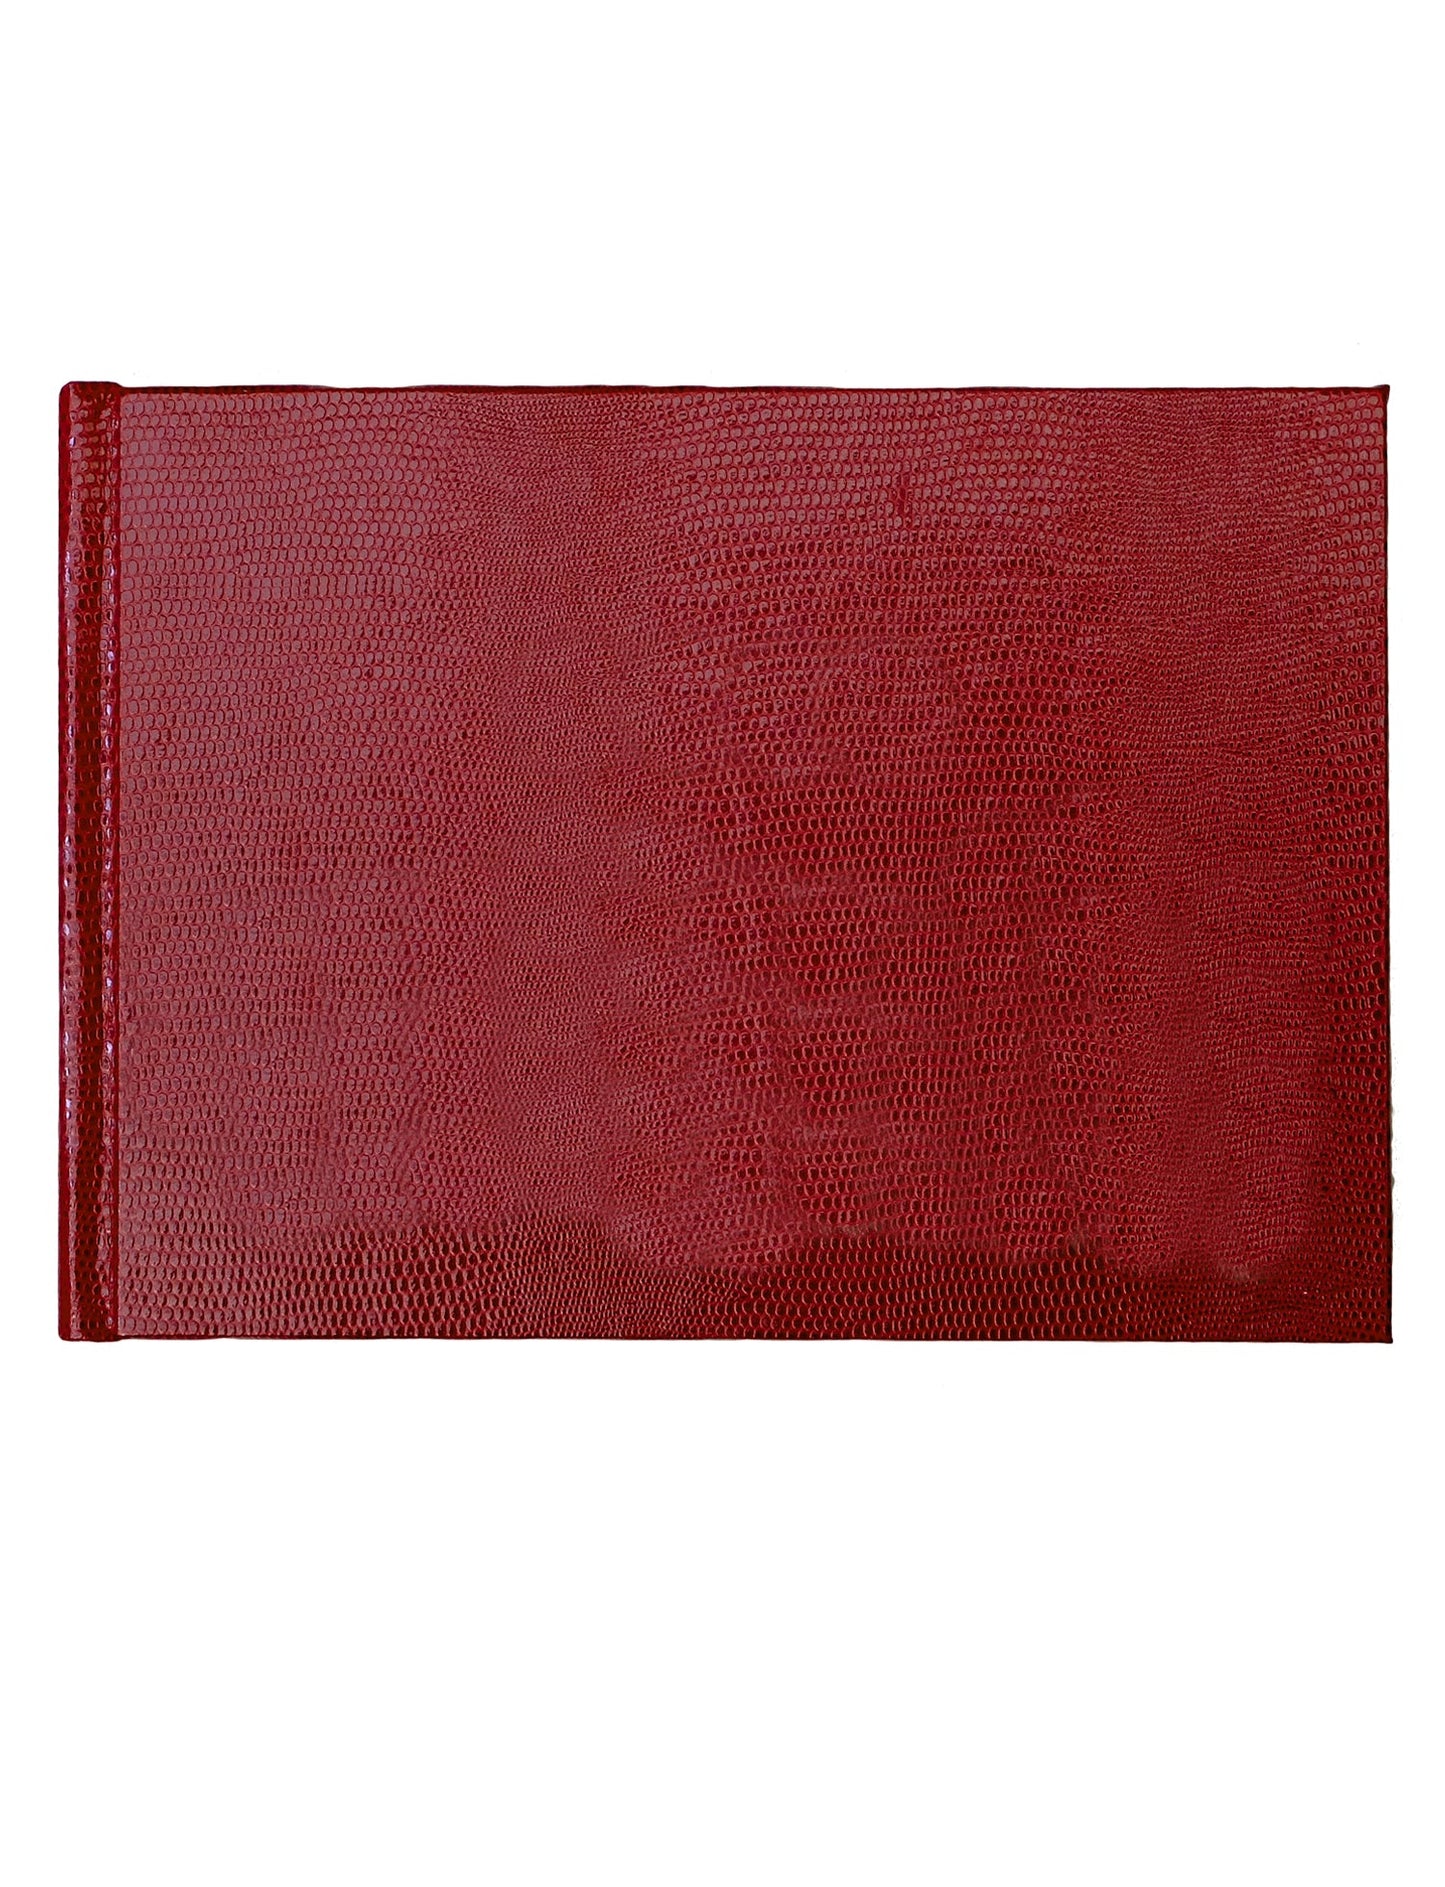 GUEST BOOK - RED